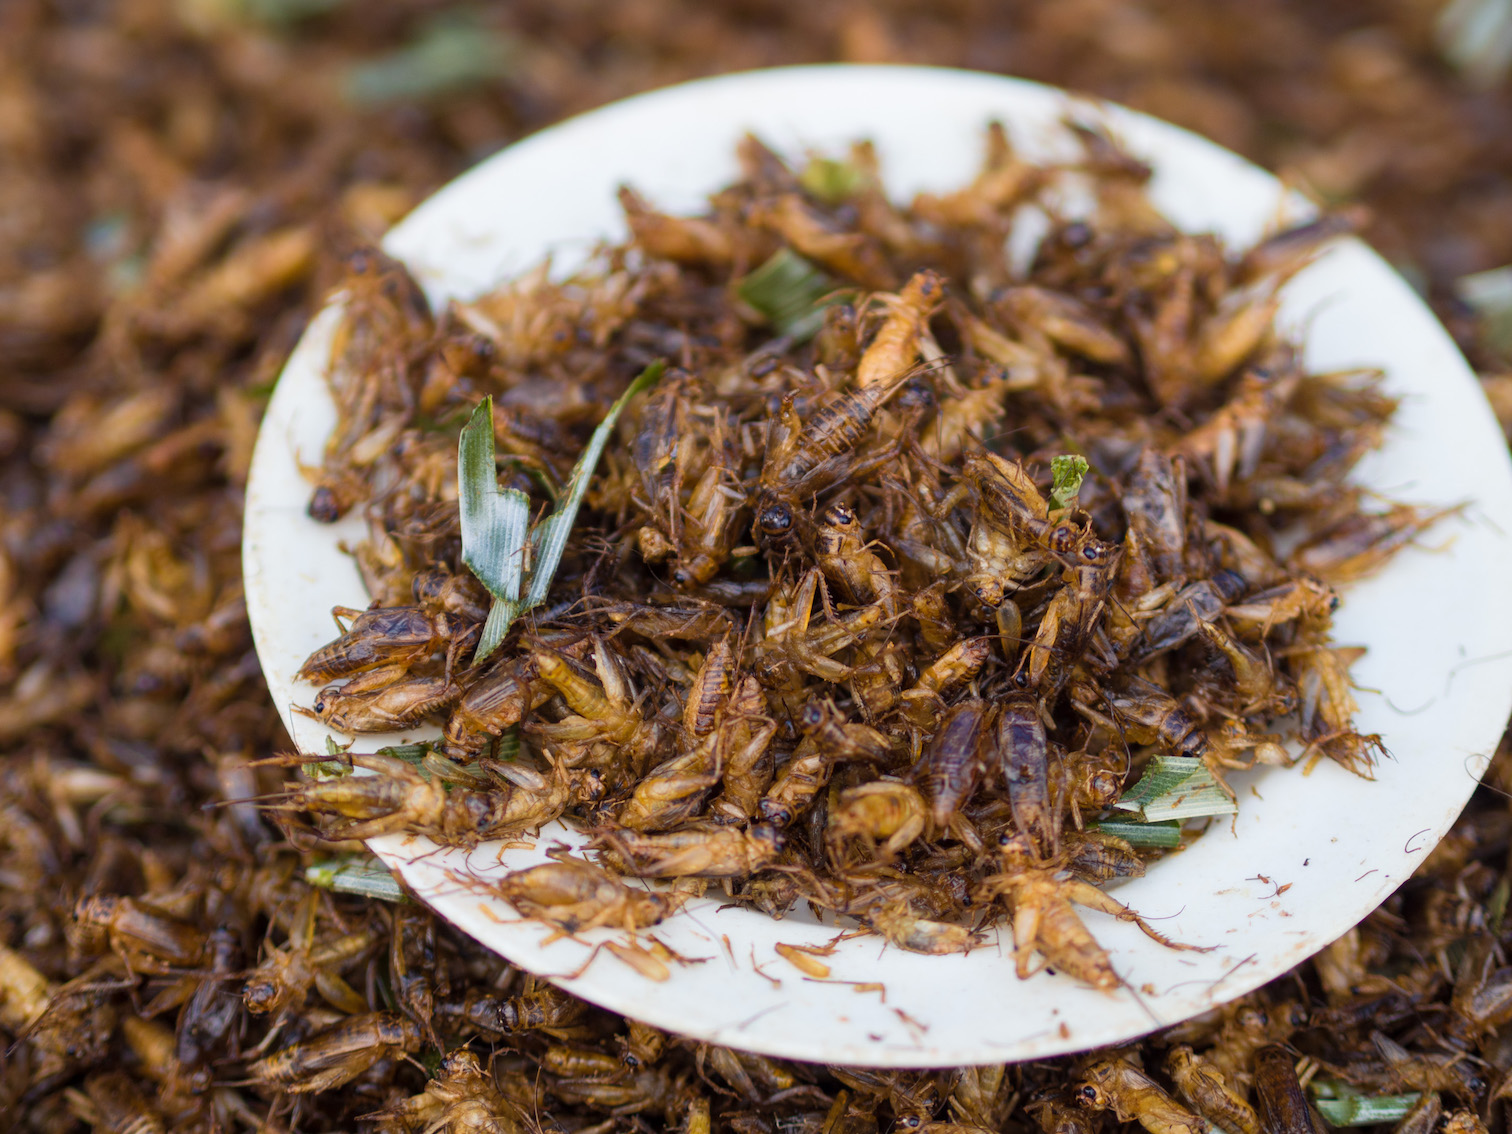 Image: Crickets are now being farmed in Kenya as a food source for humans